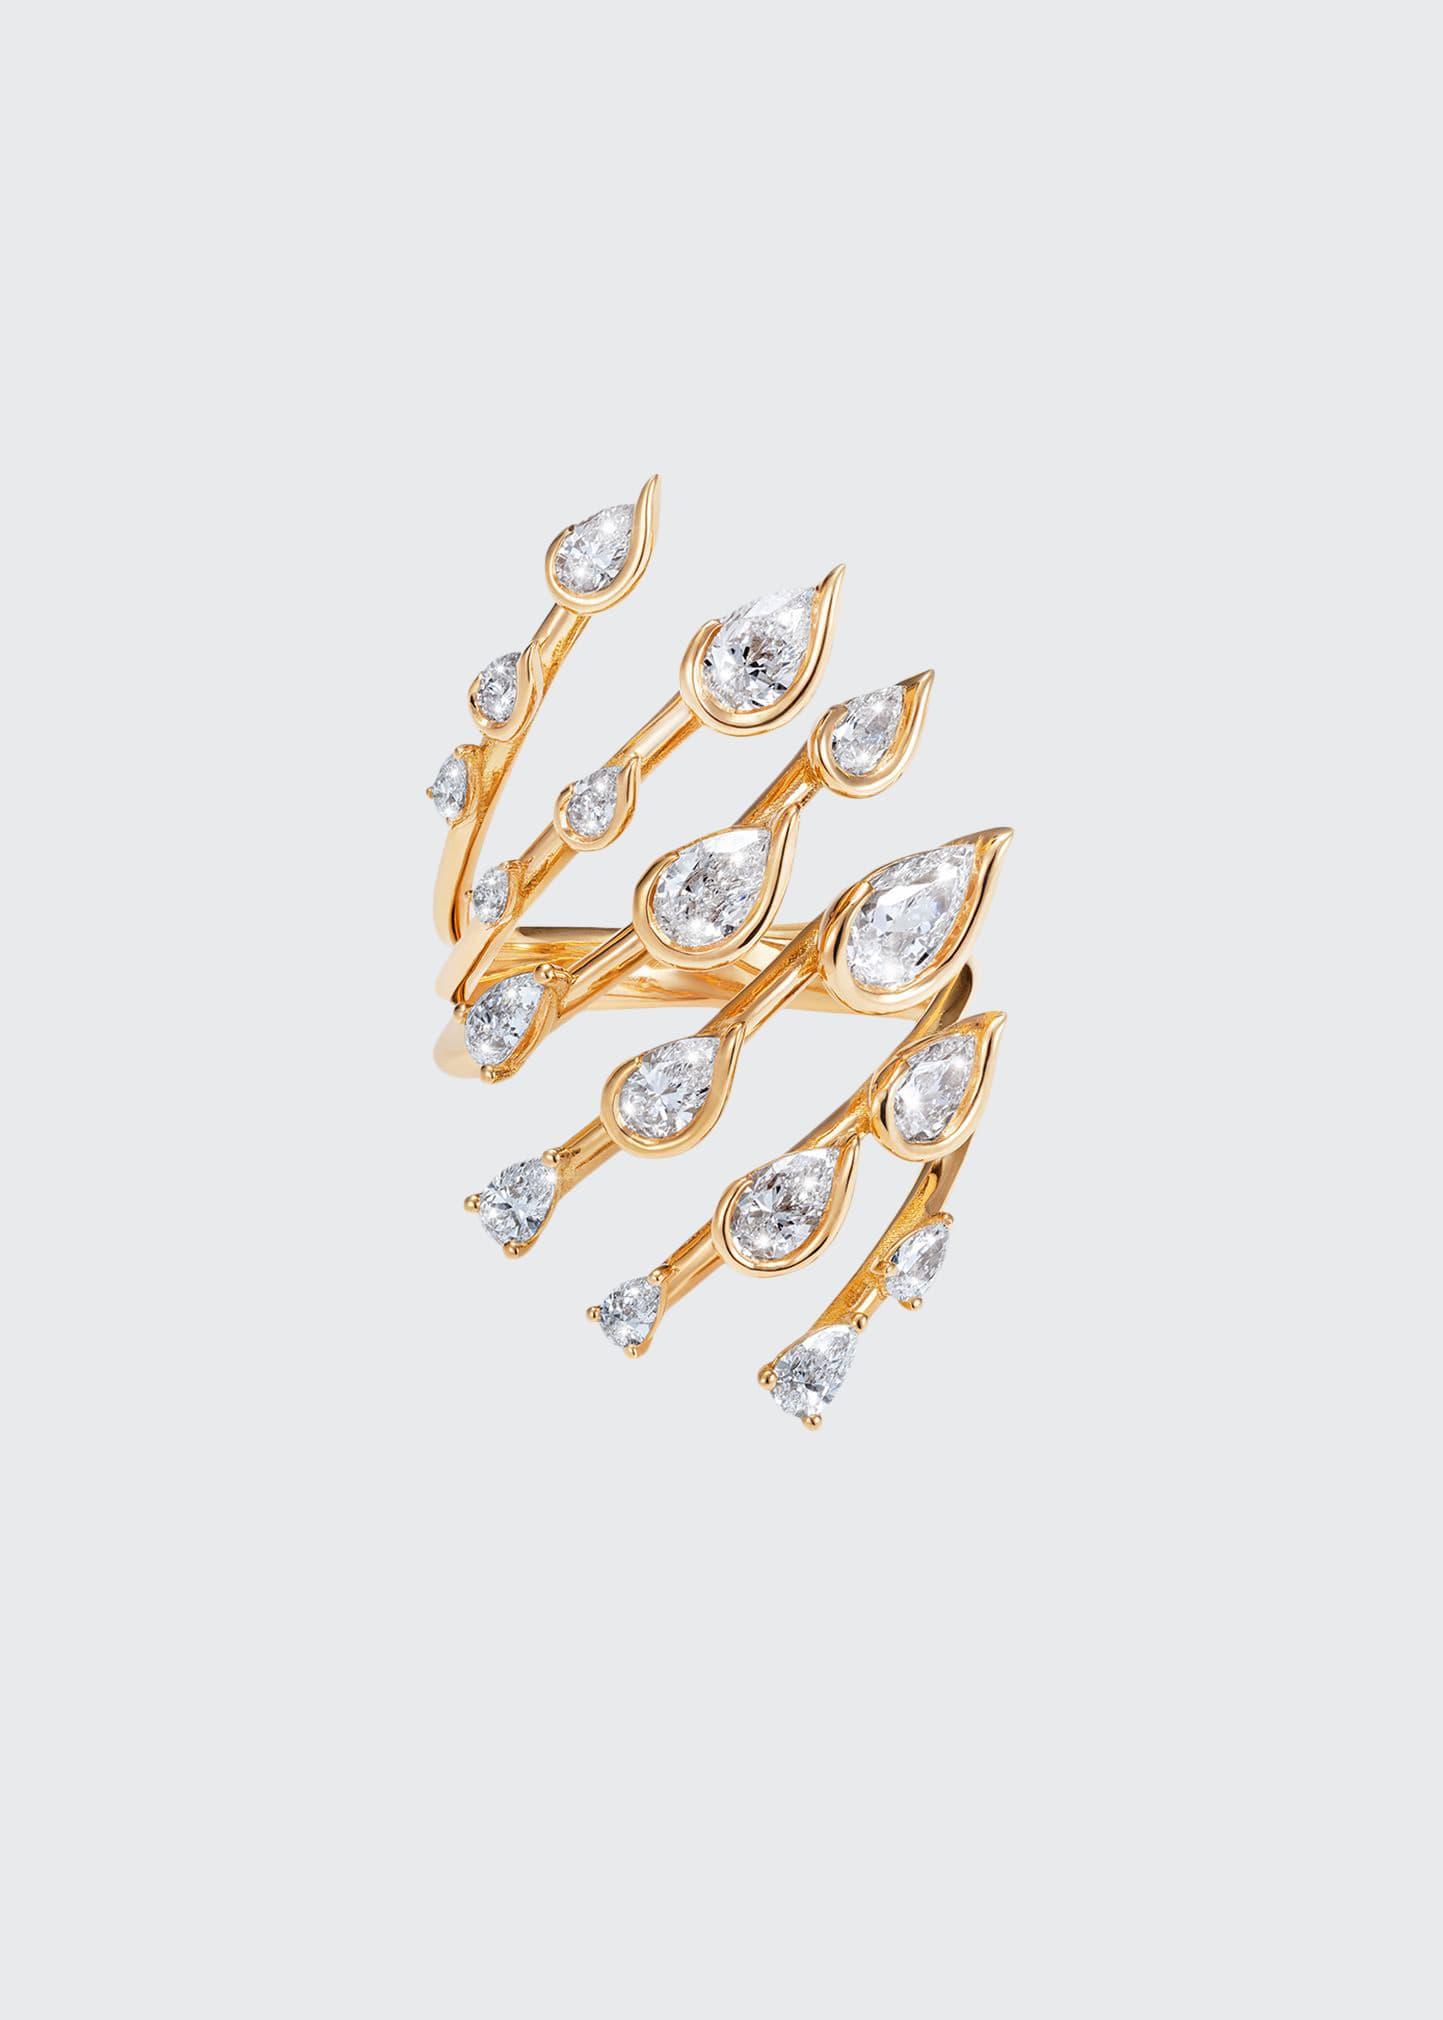 Fernando Jorge Flare Small Ring in 18K Yellow Gold and Diamonds